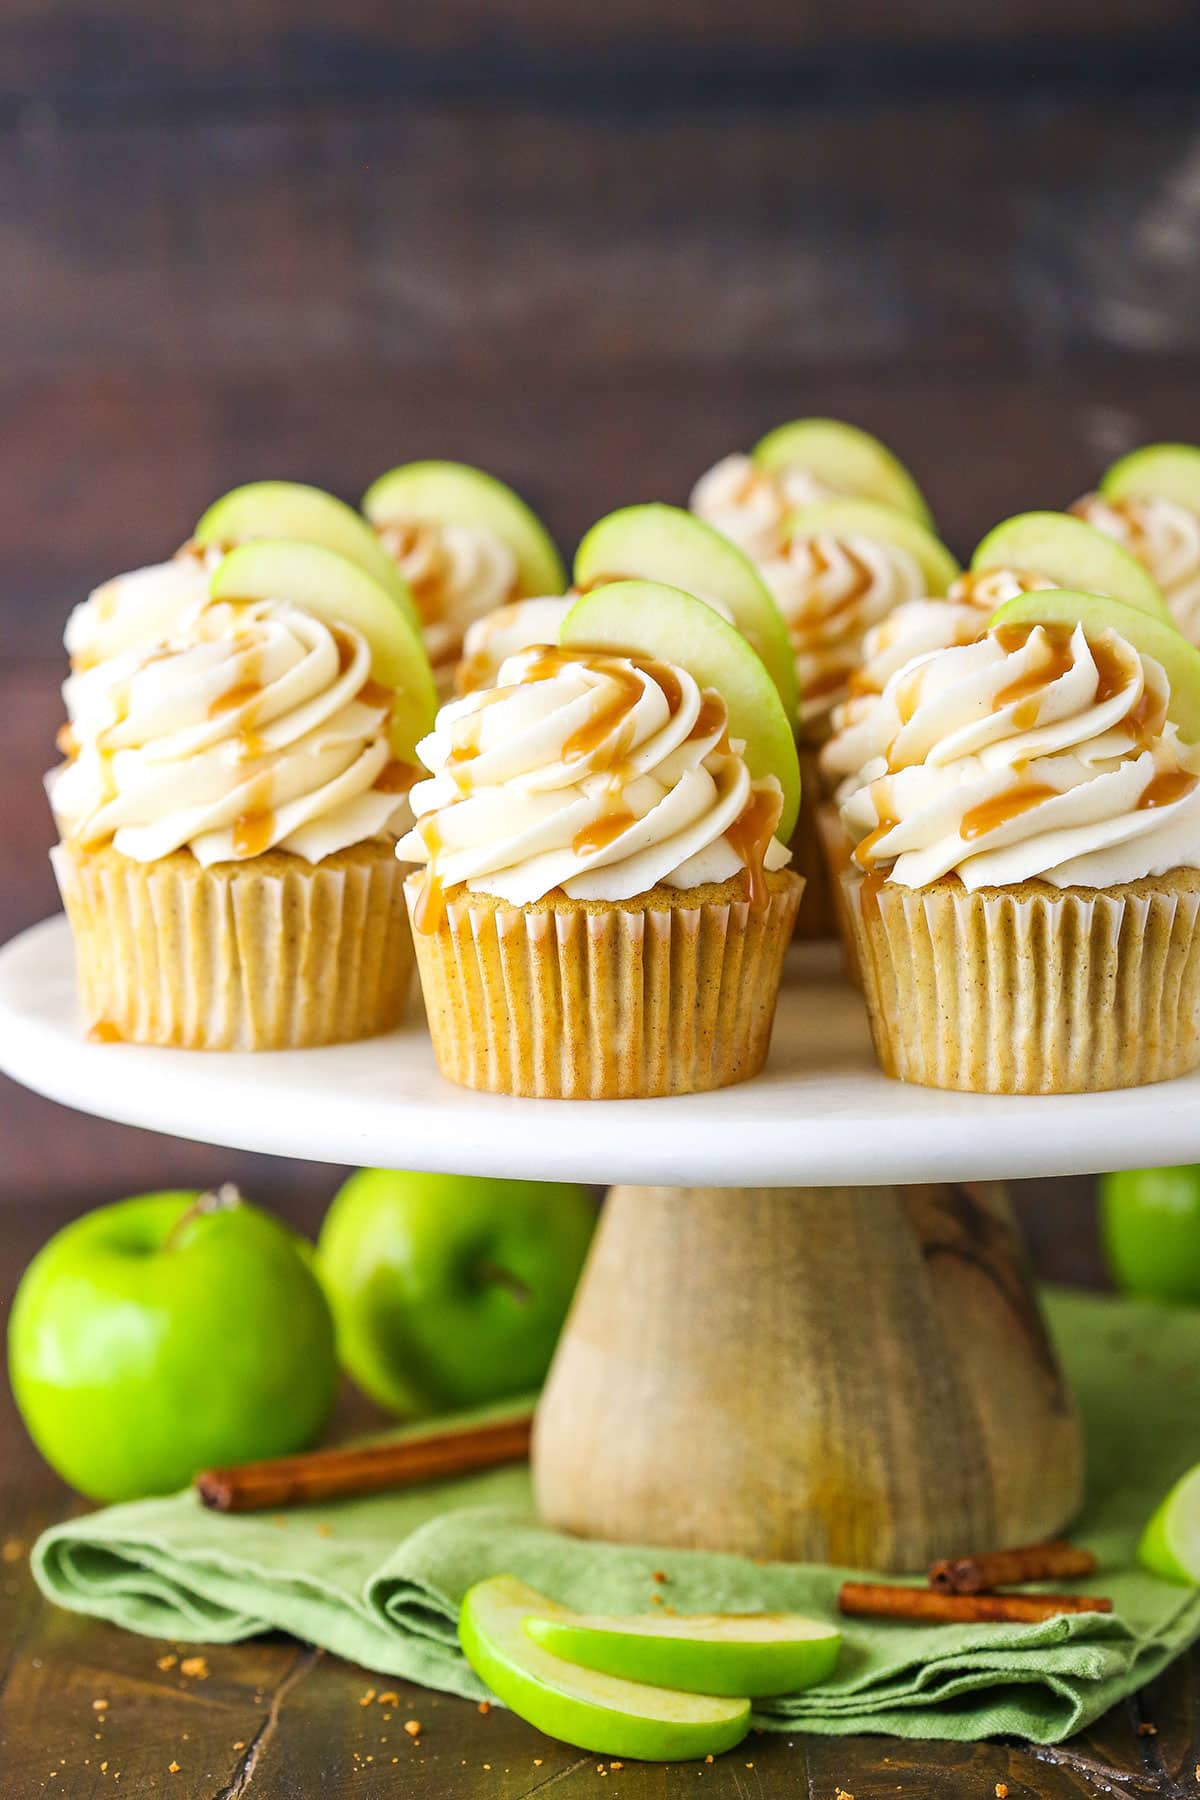 Caramel Apple Cupcakes topped with frosting swirls, a slice of apple and caramel sauce on a cake stand